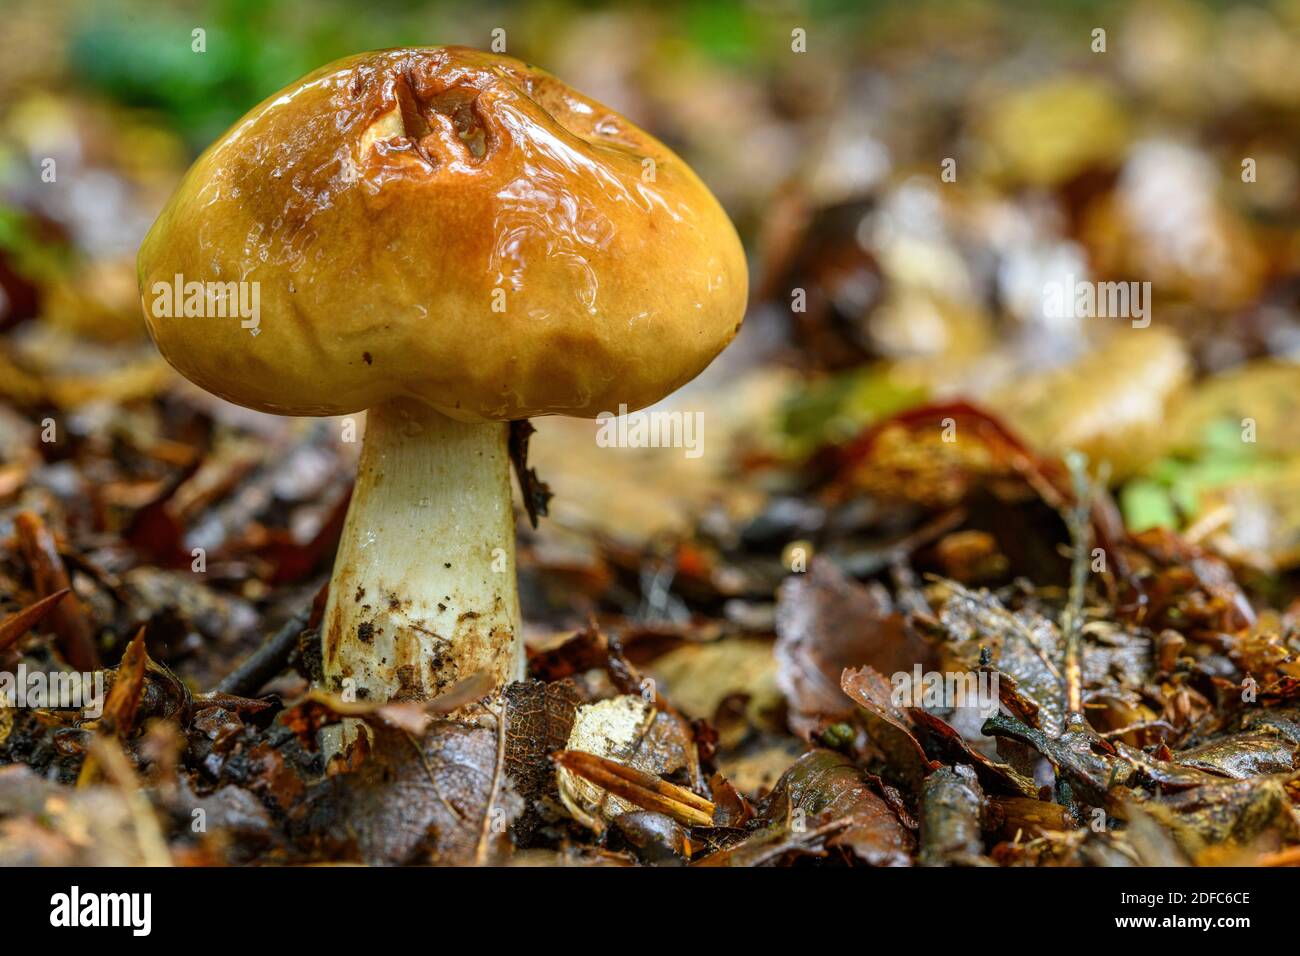 France, Somme (80), Cr?cy-en-Ponthieu, Cr?cy forest, Mushroom, Tricholoma ustale Stock Photo